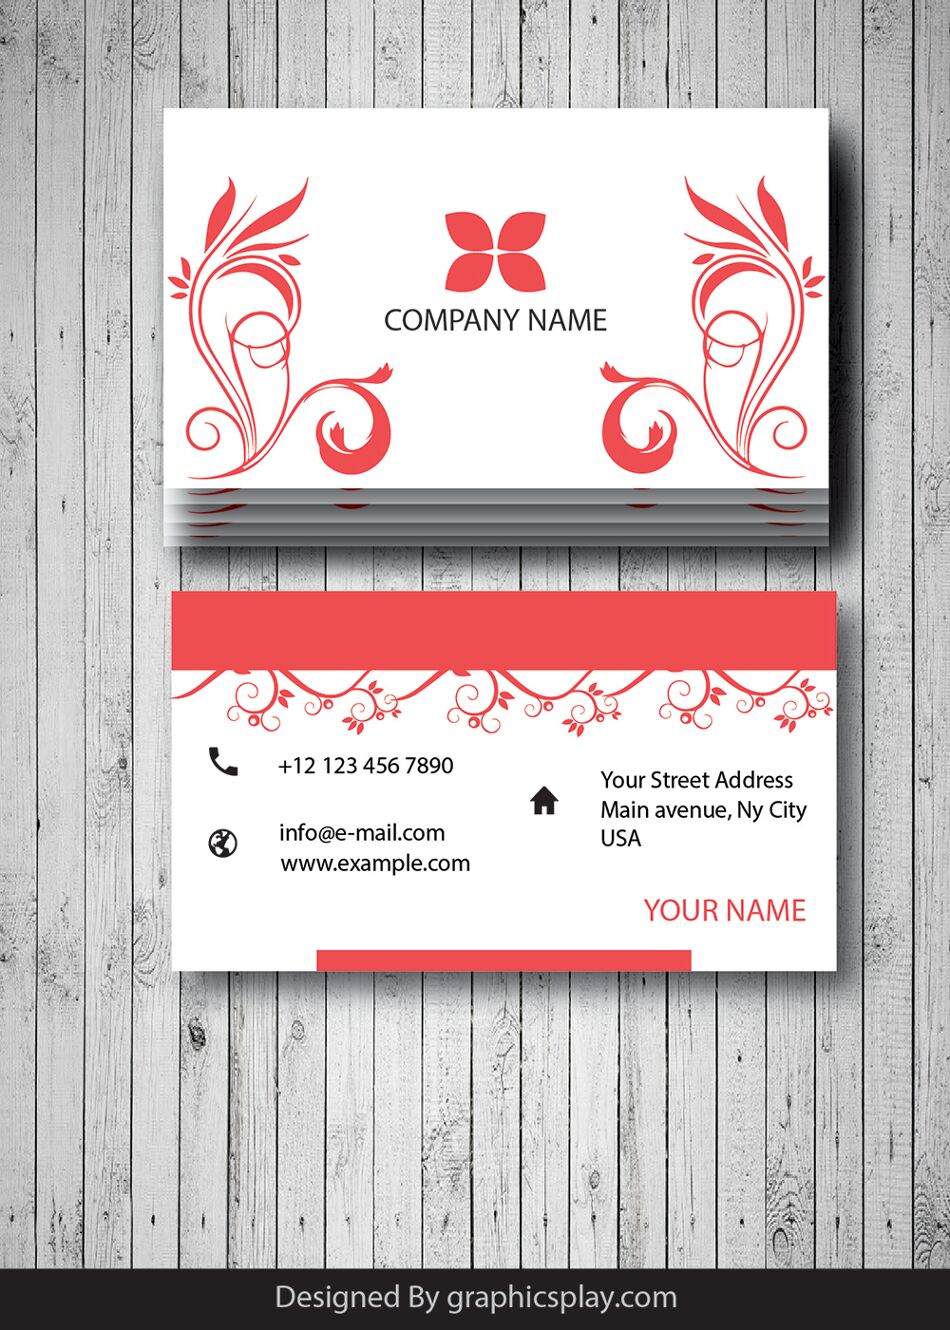 Business Card Design Vector Template - ID 1699 1